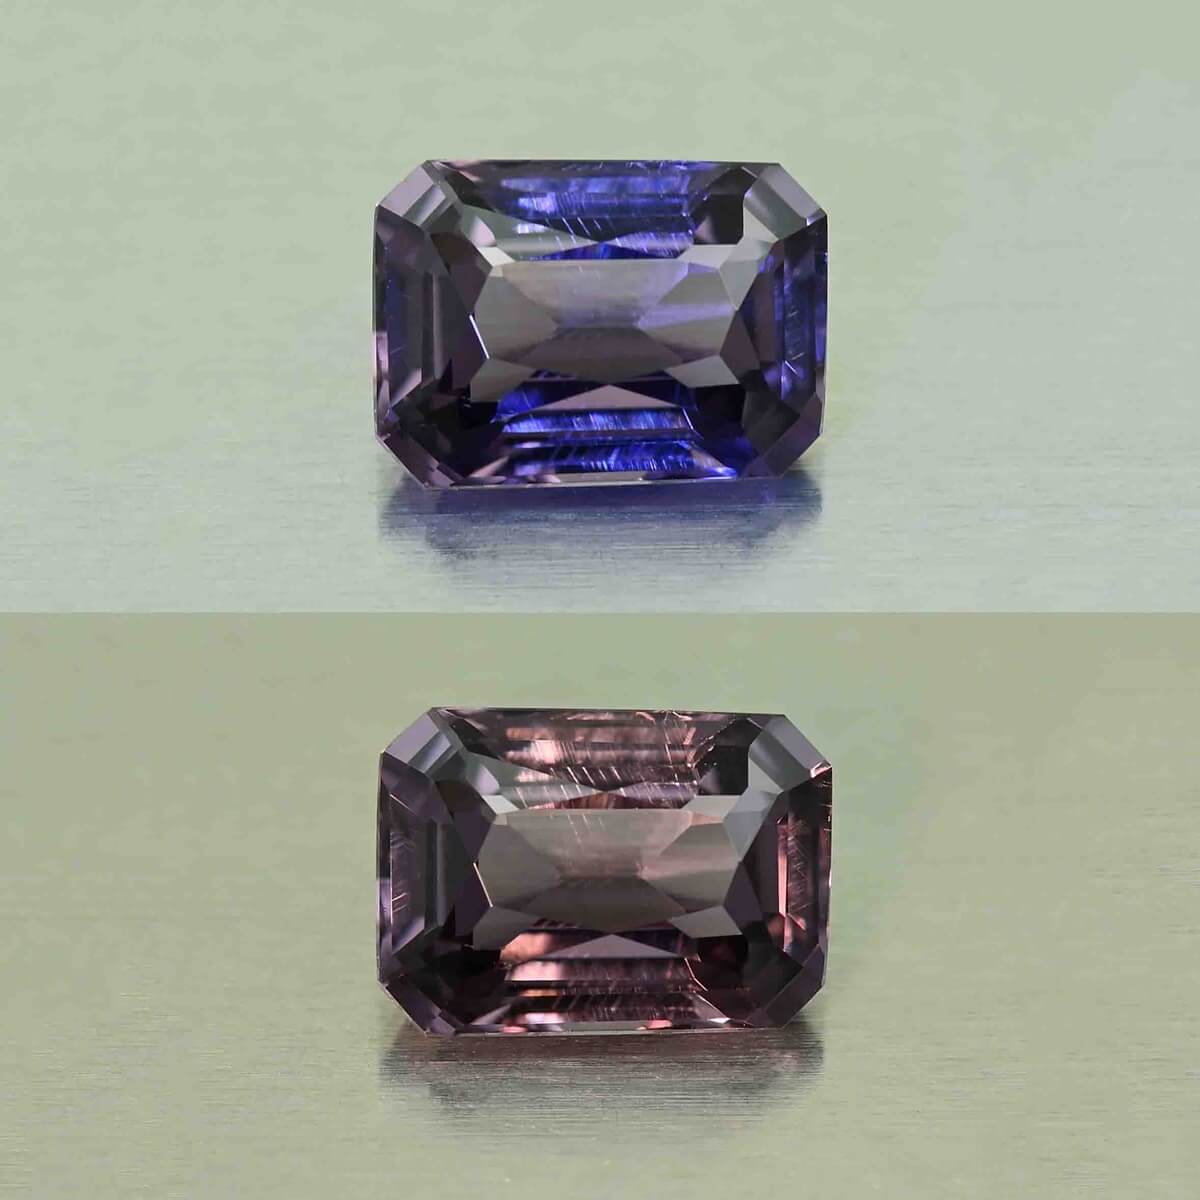 ColorChangeSpinel_rad_9.4x6.8mm_2.95cts_N_sp924_combo